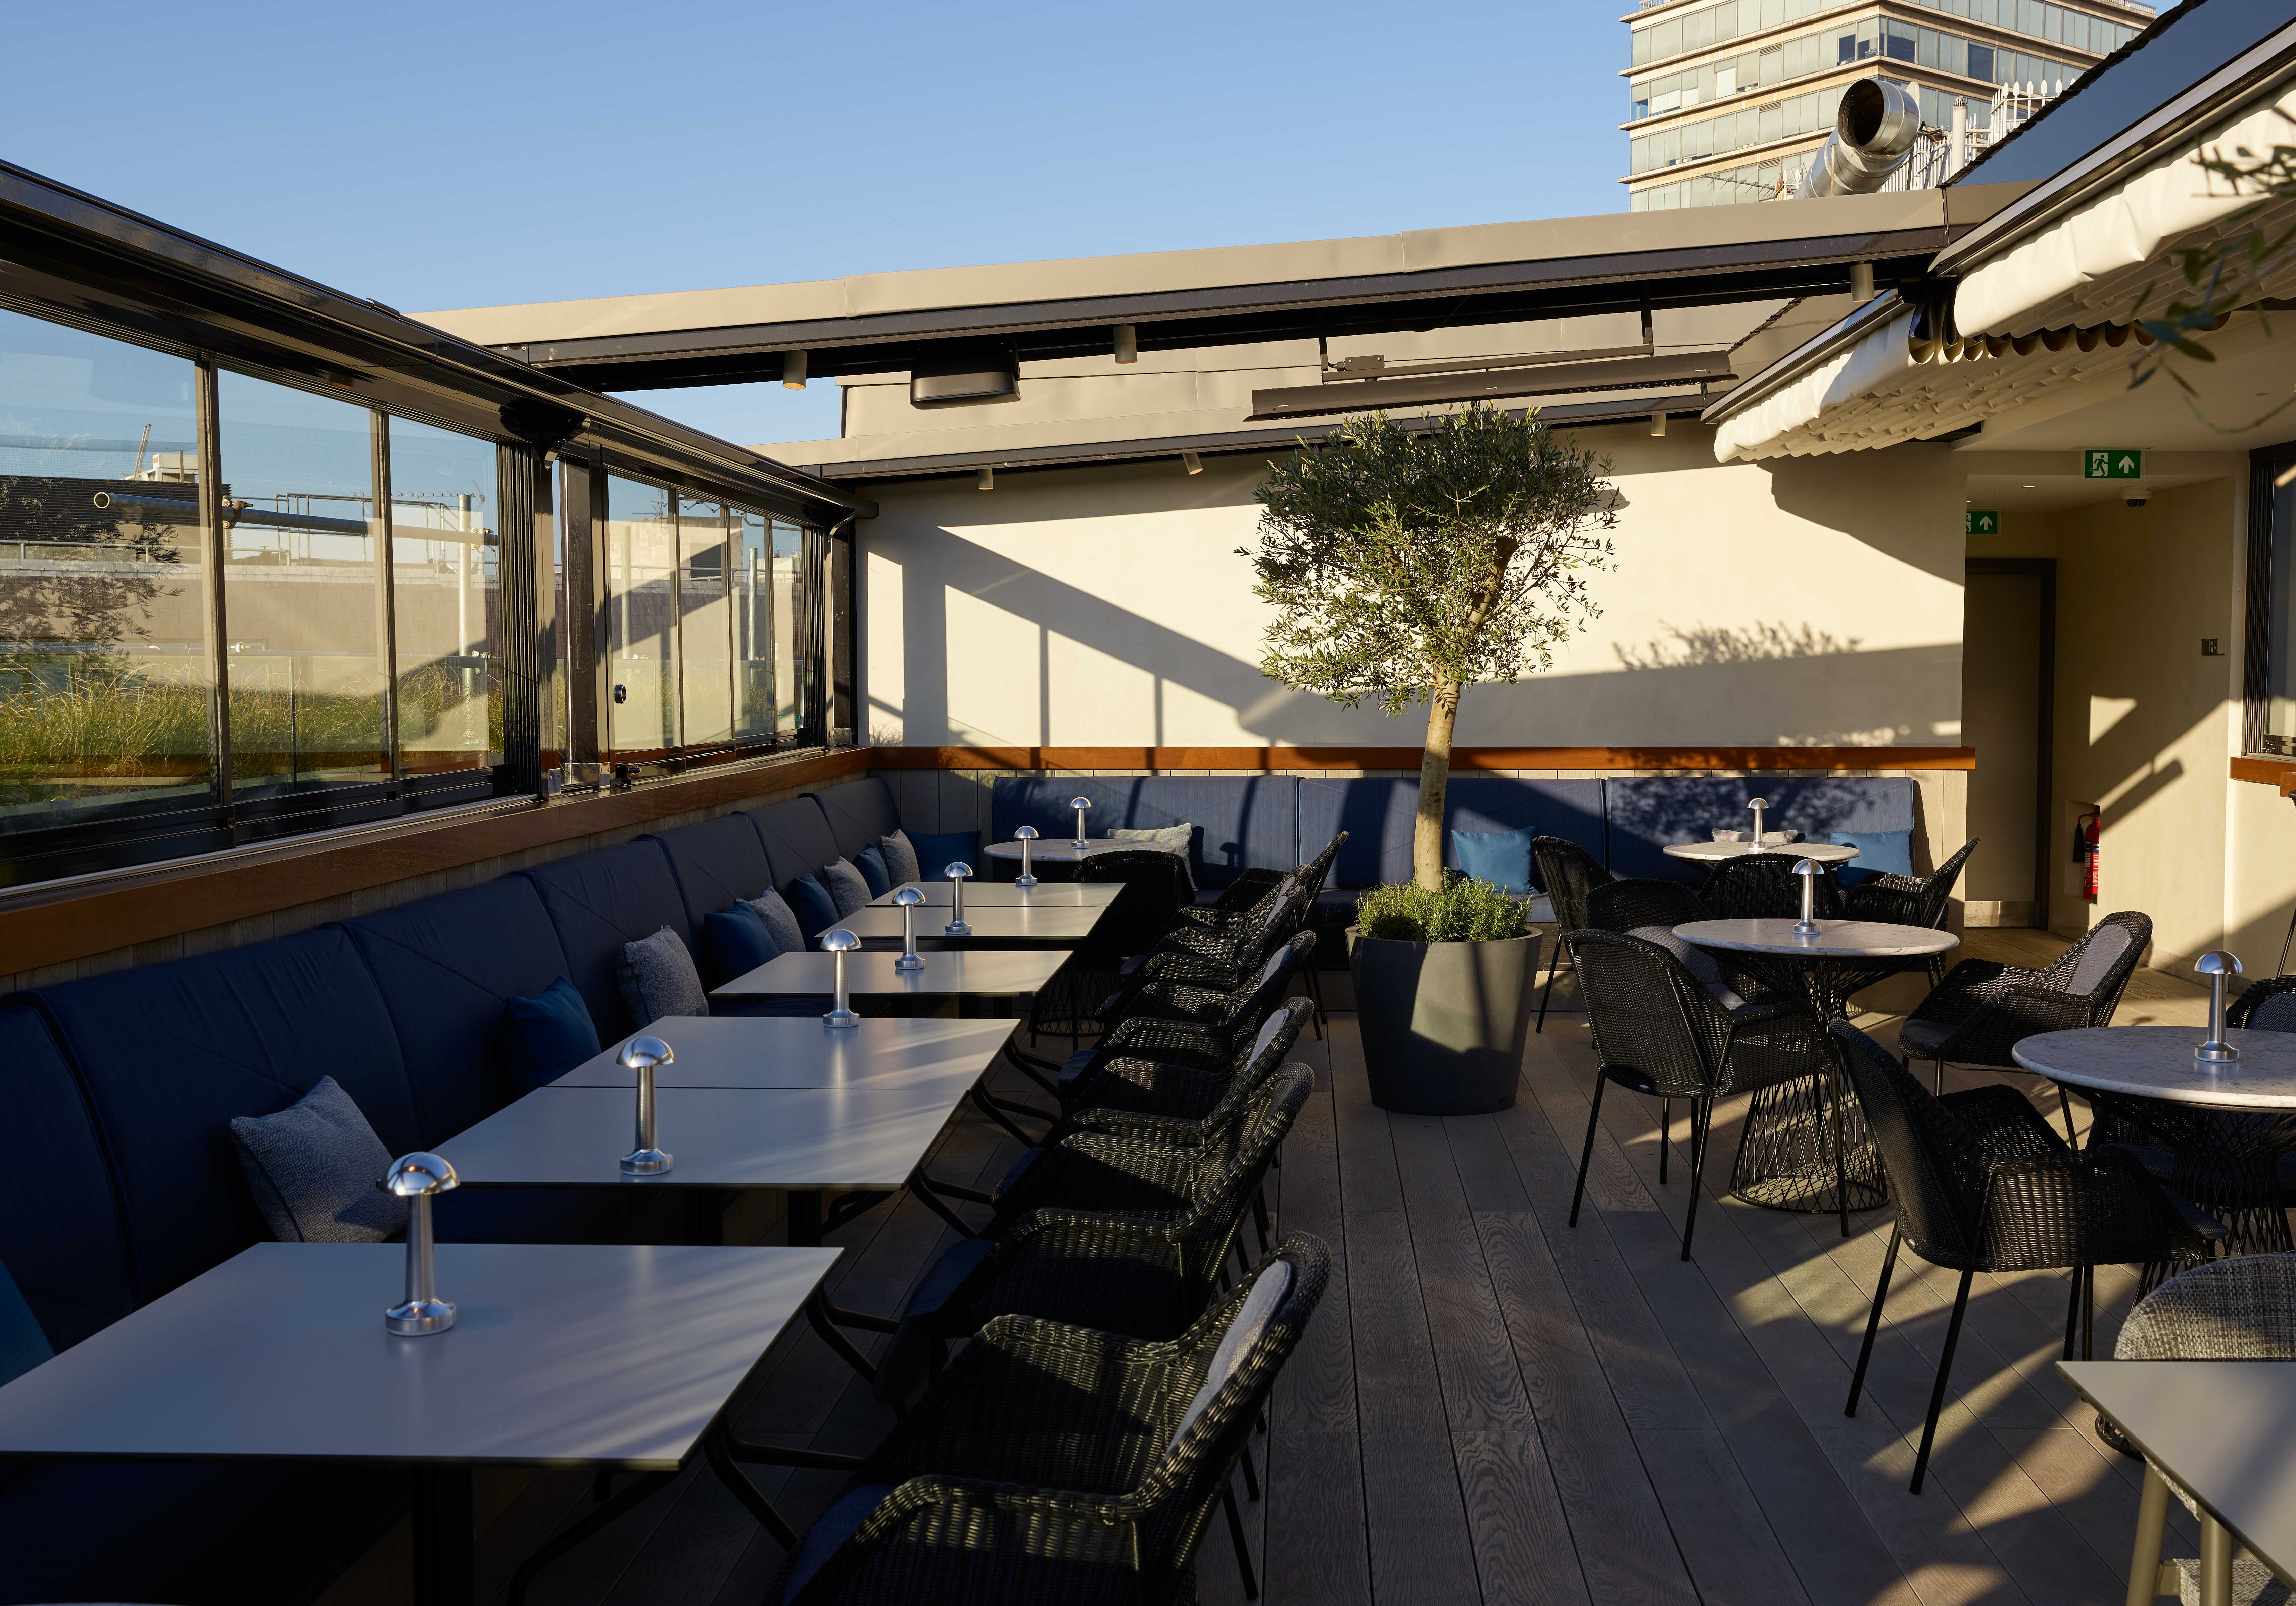 Rooftop restaurant private event dining area with open ceiling